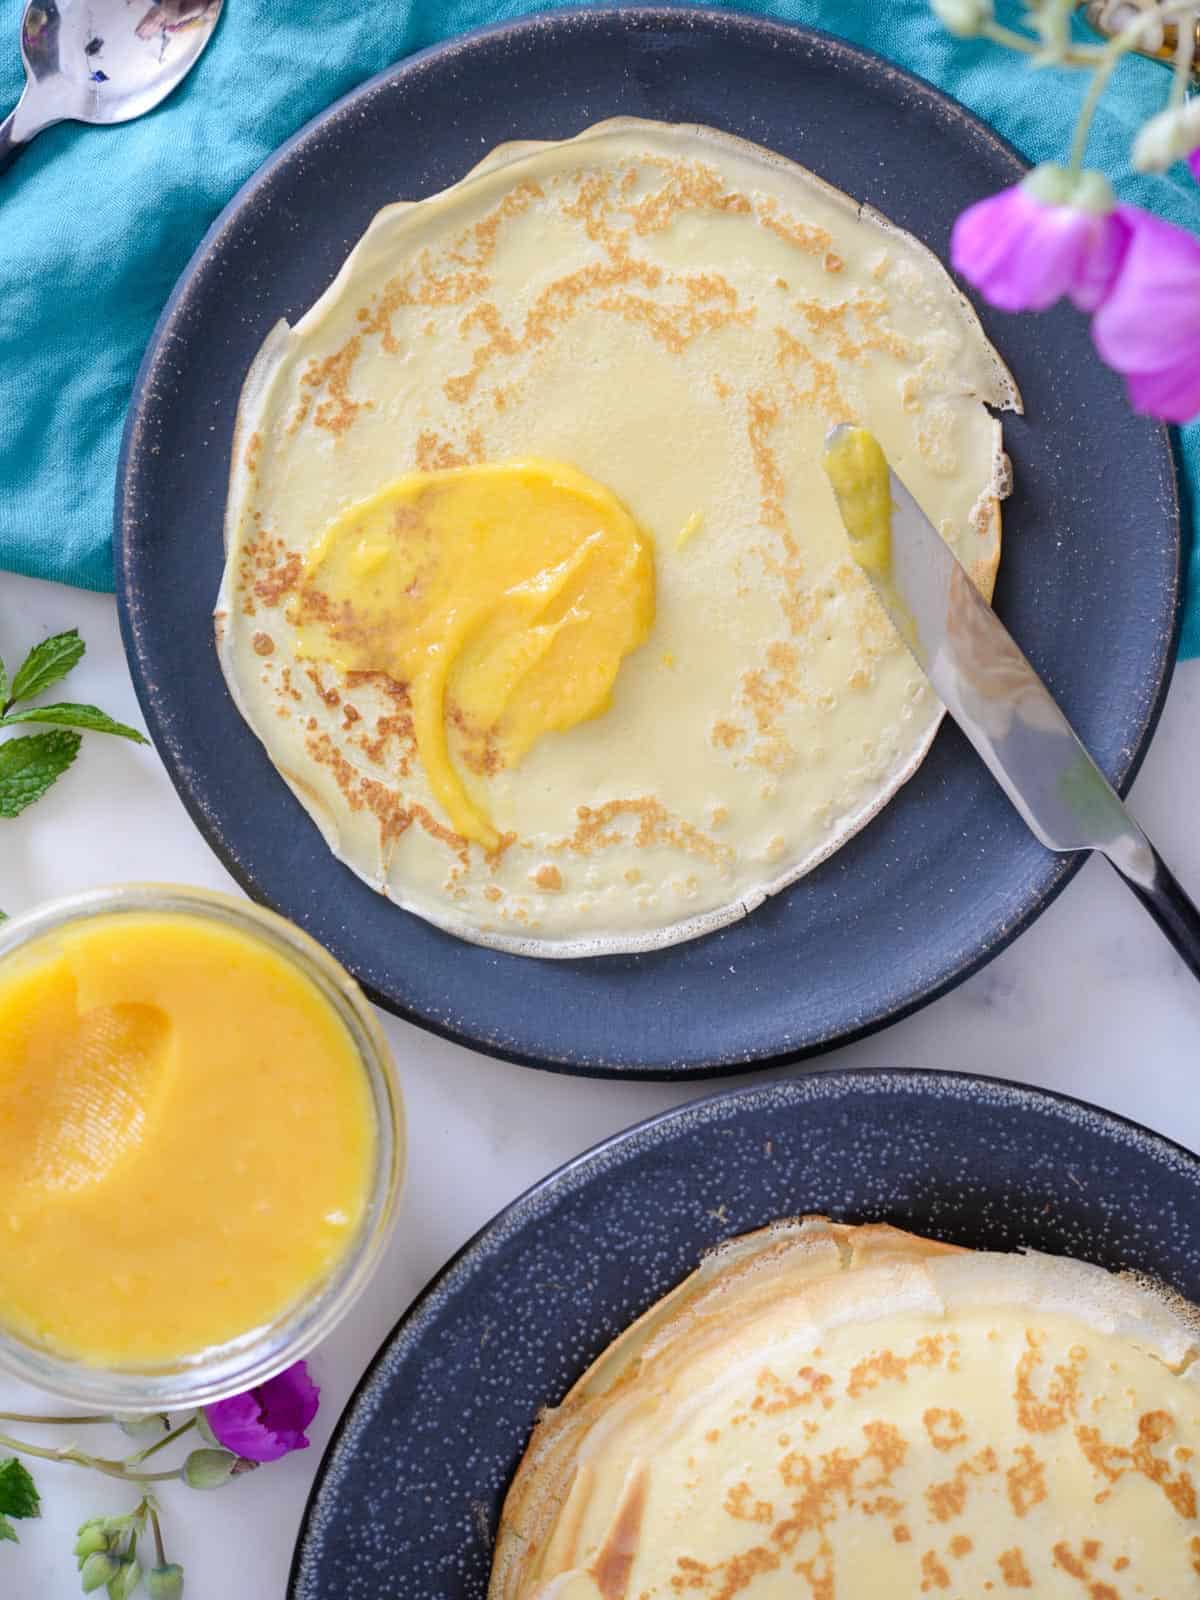 one french crepe with lemon curd spread on it